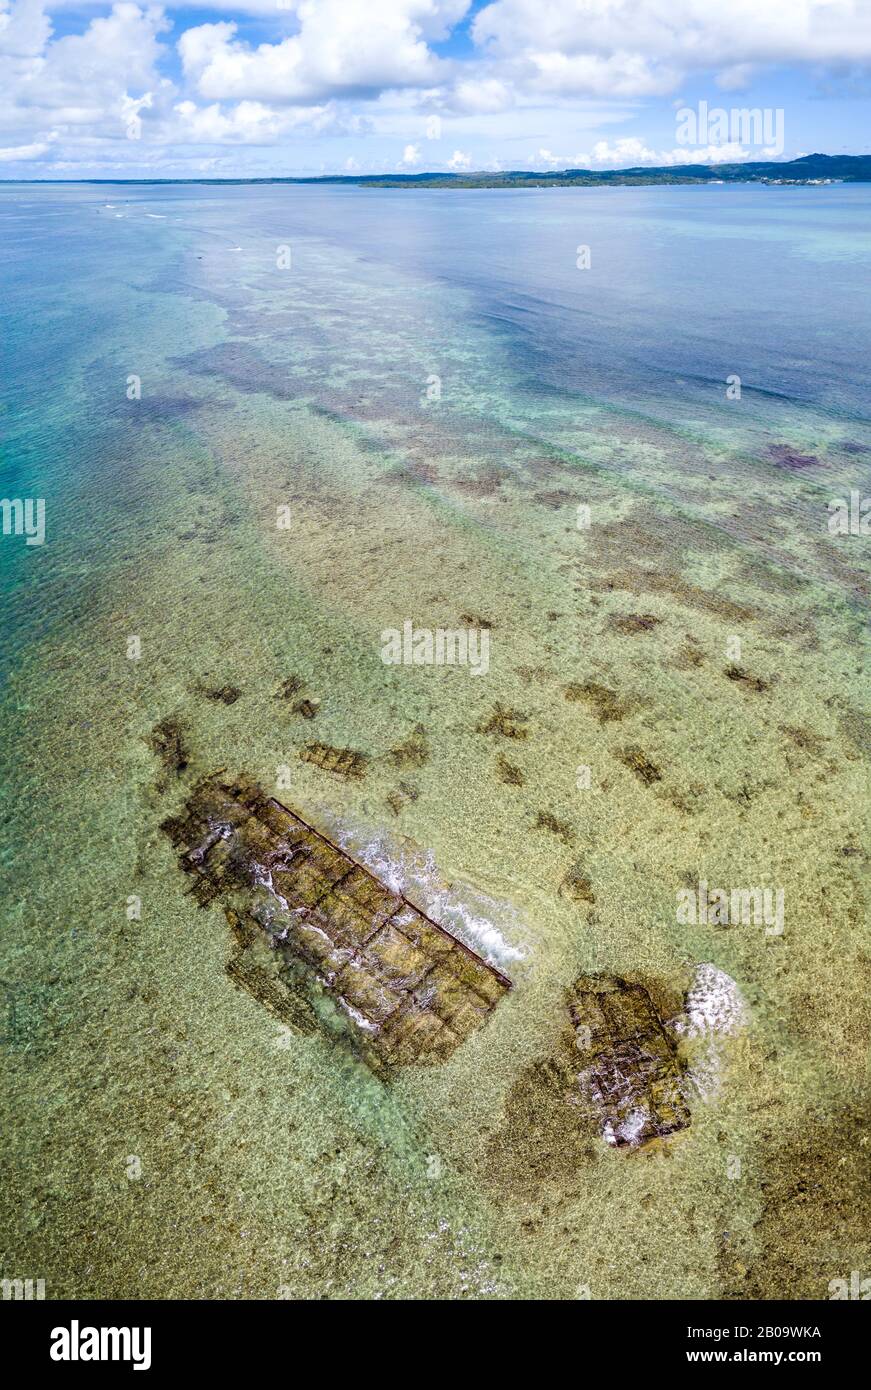 An aerial view of the remains of a shipwreck on the outer reef off the island of Yap, Micronesia. Stock Photo